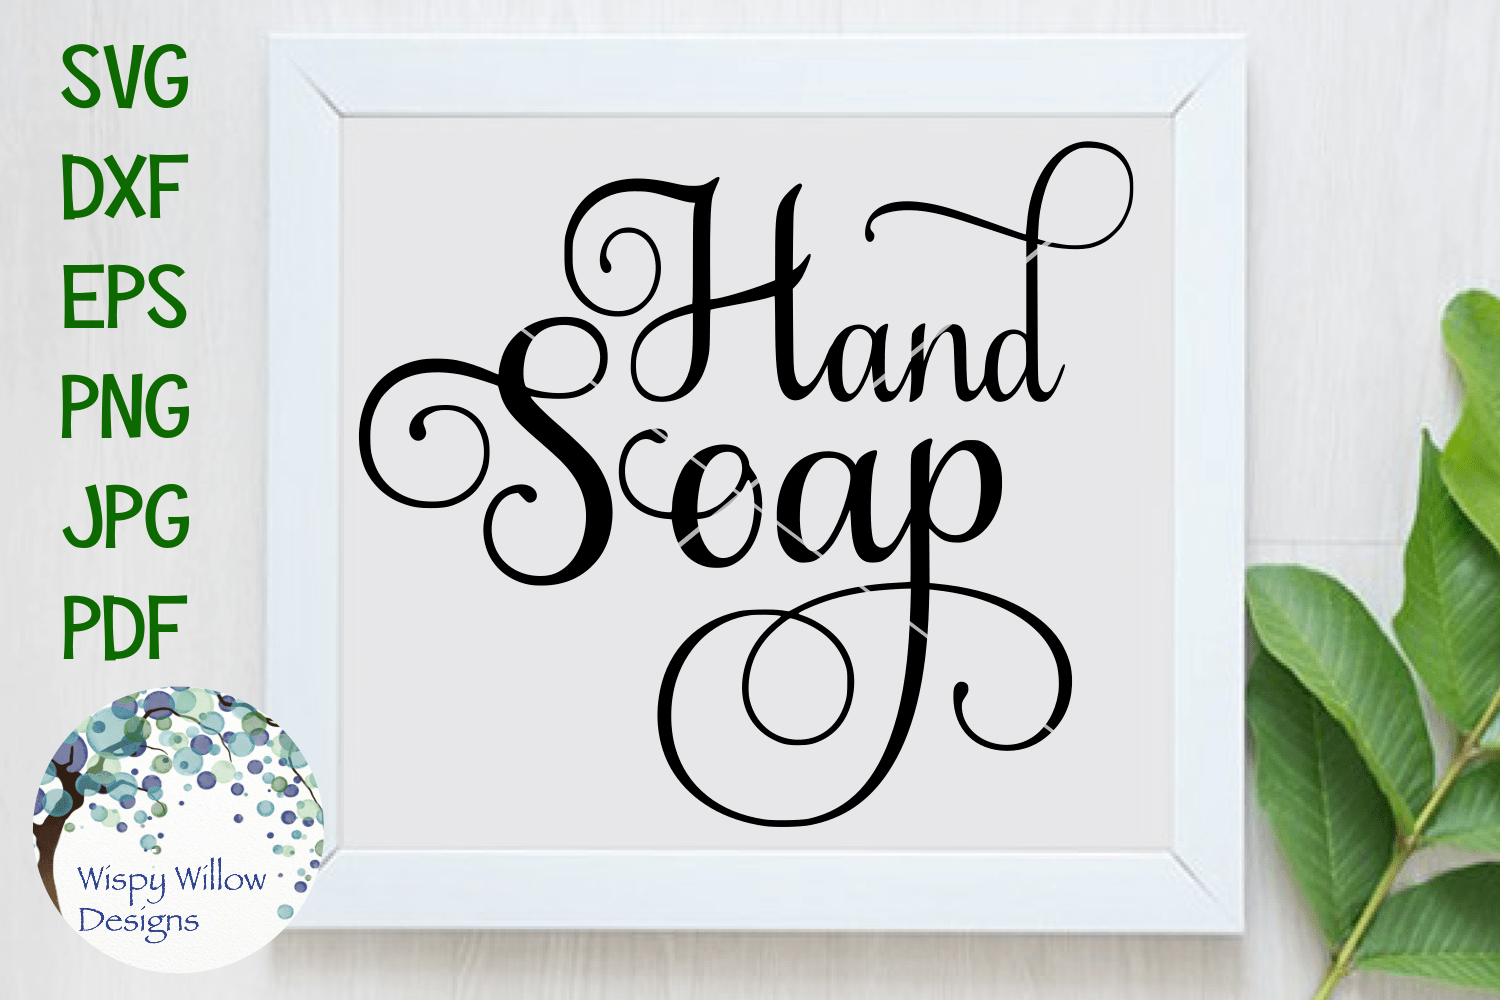 Hand Soap SVG | Kitchen Pantry Label Wispy Willow Designs Company